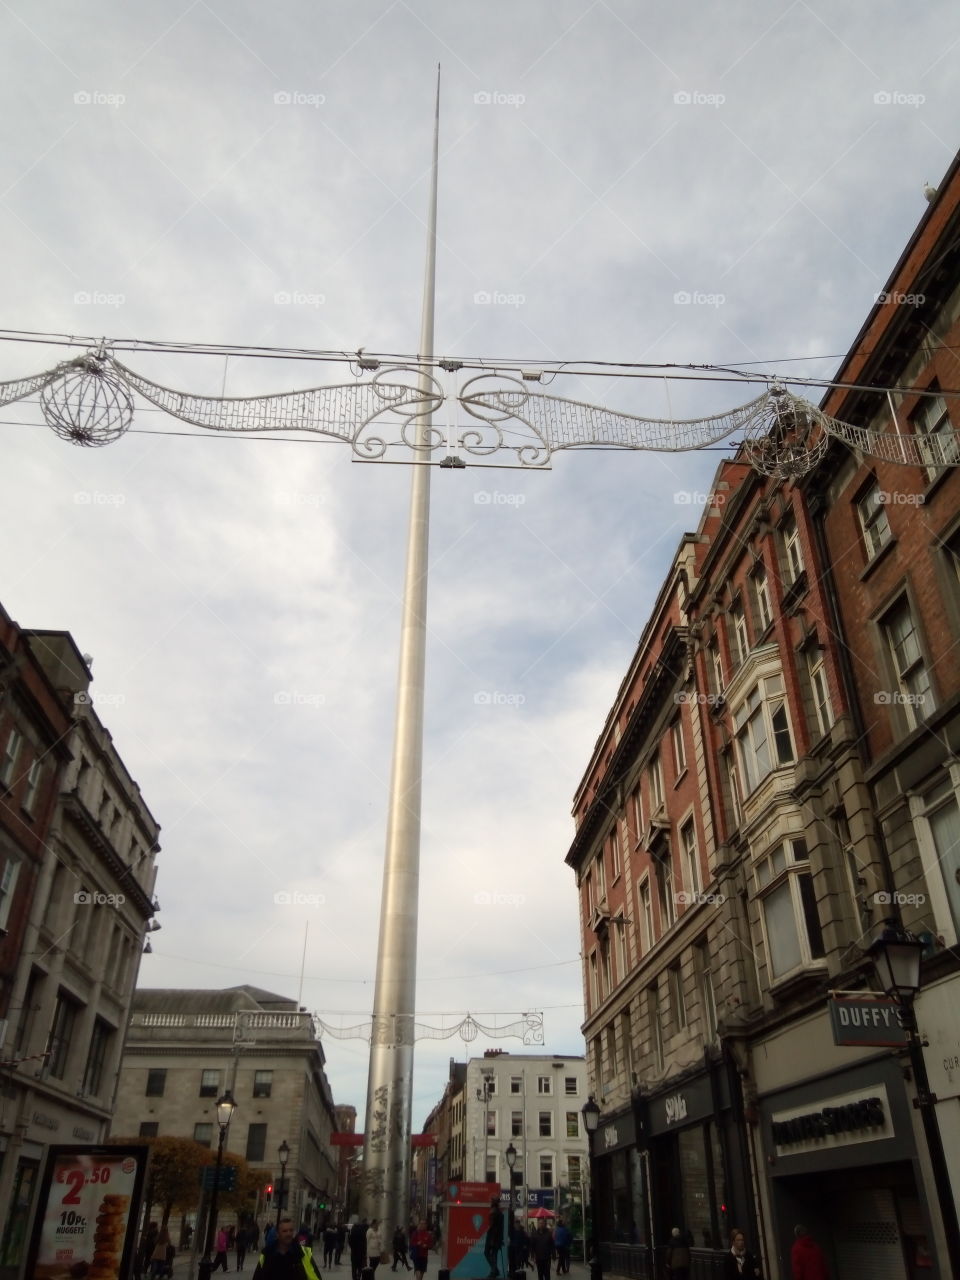 the centre piece Dublin's main art - the spire Dublin things so tall it's so hard to get the angels of the height I'll try again on a good day